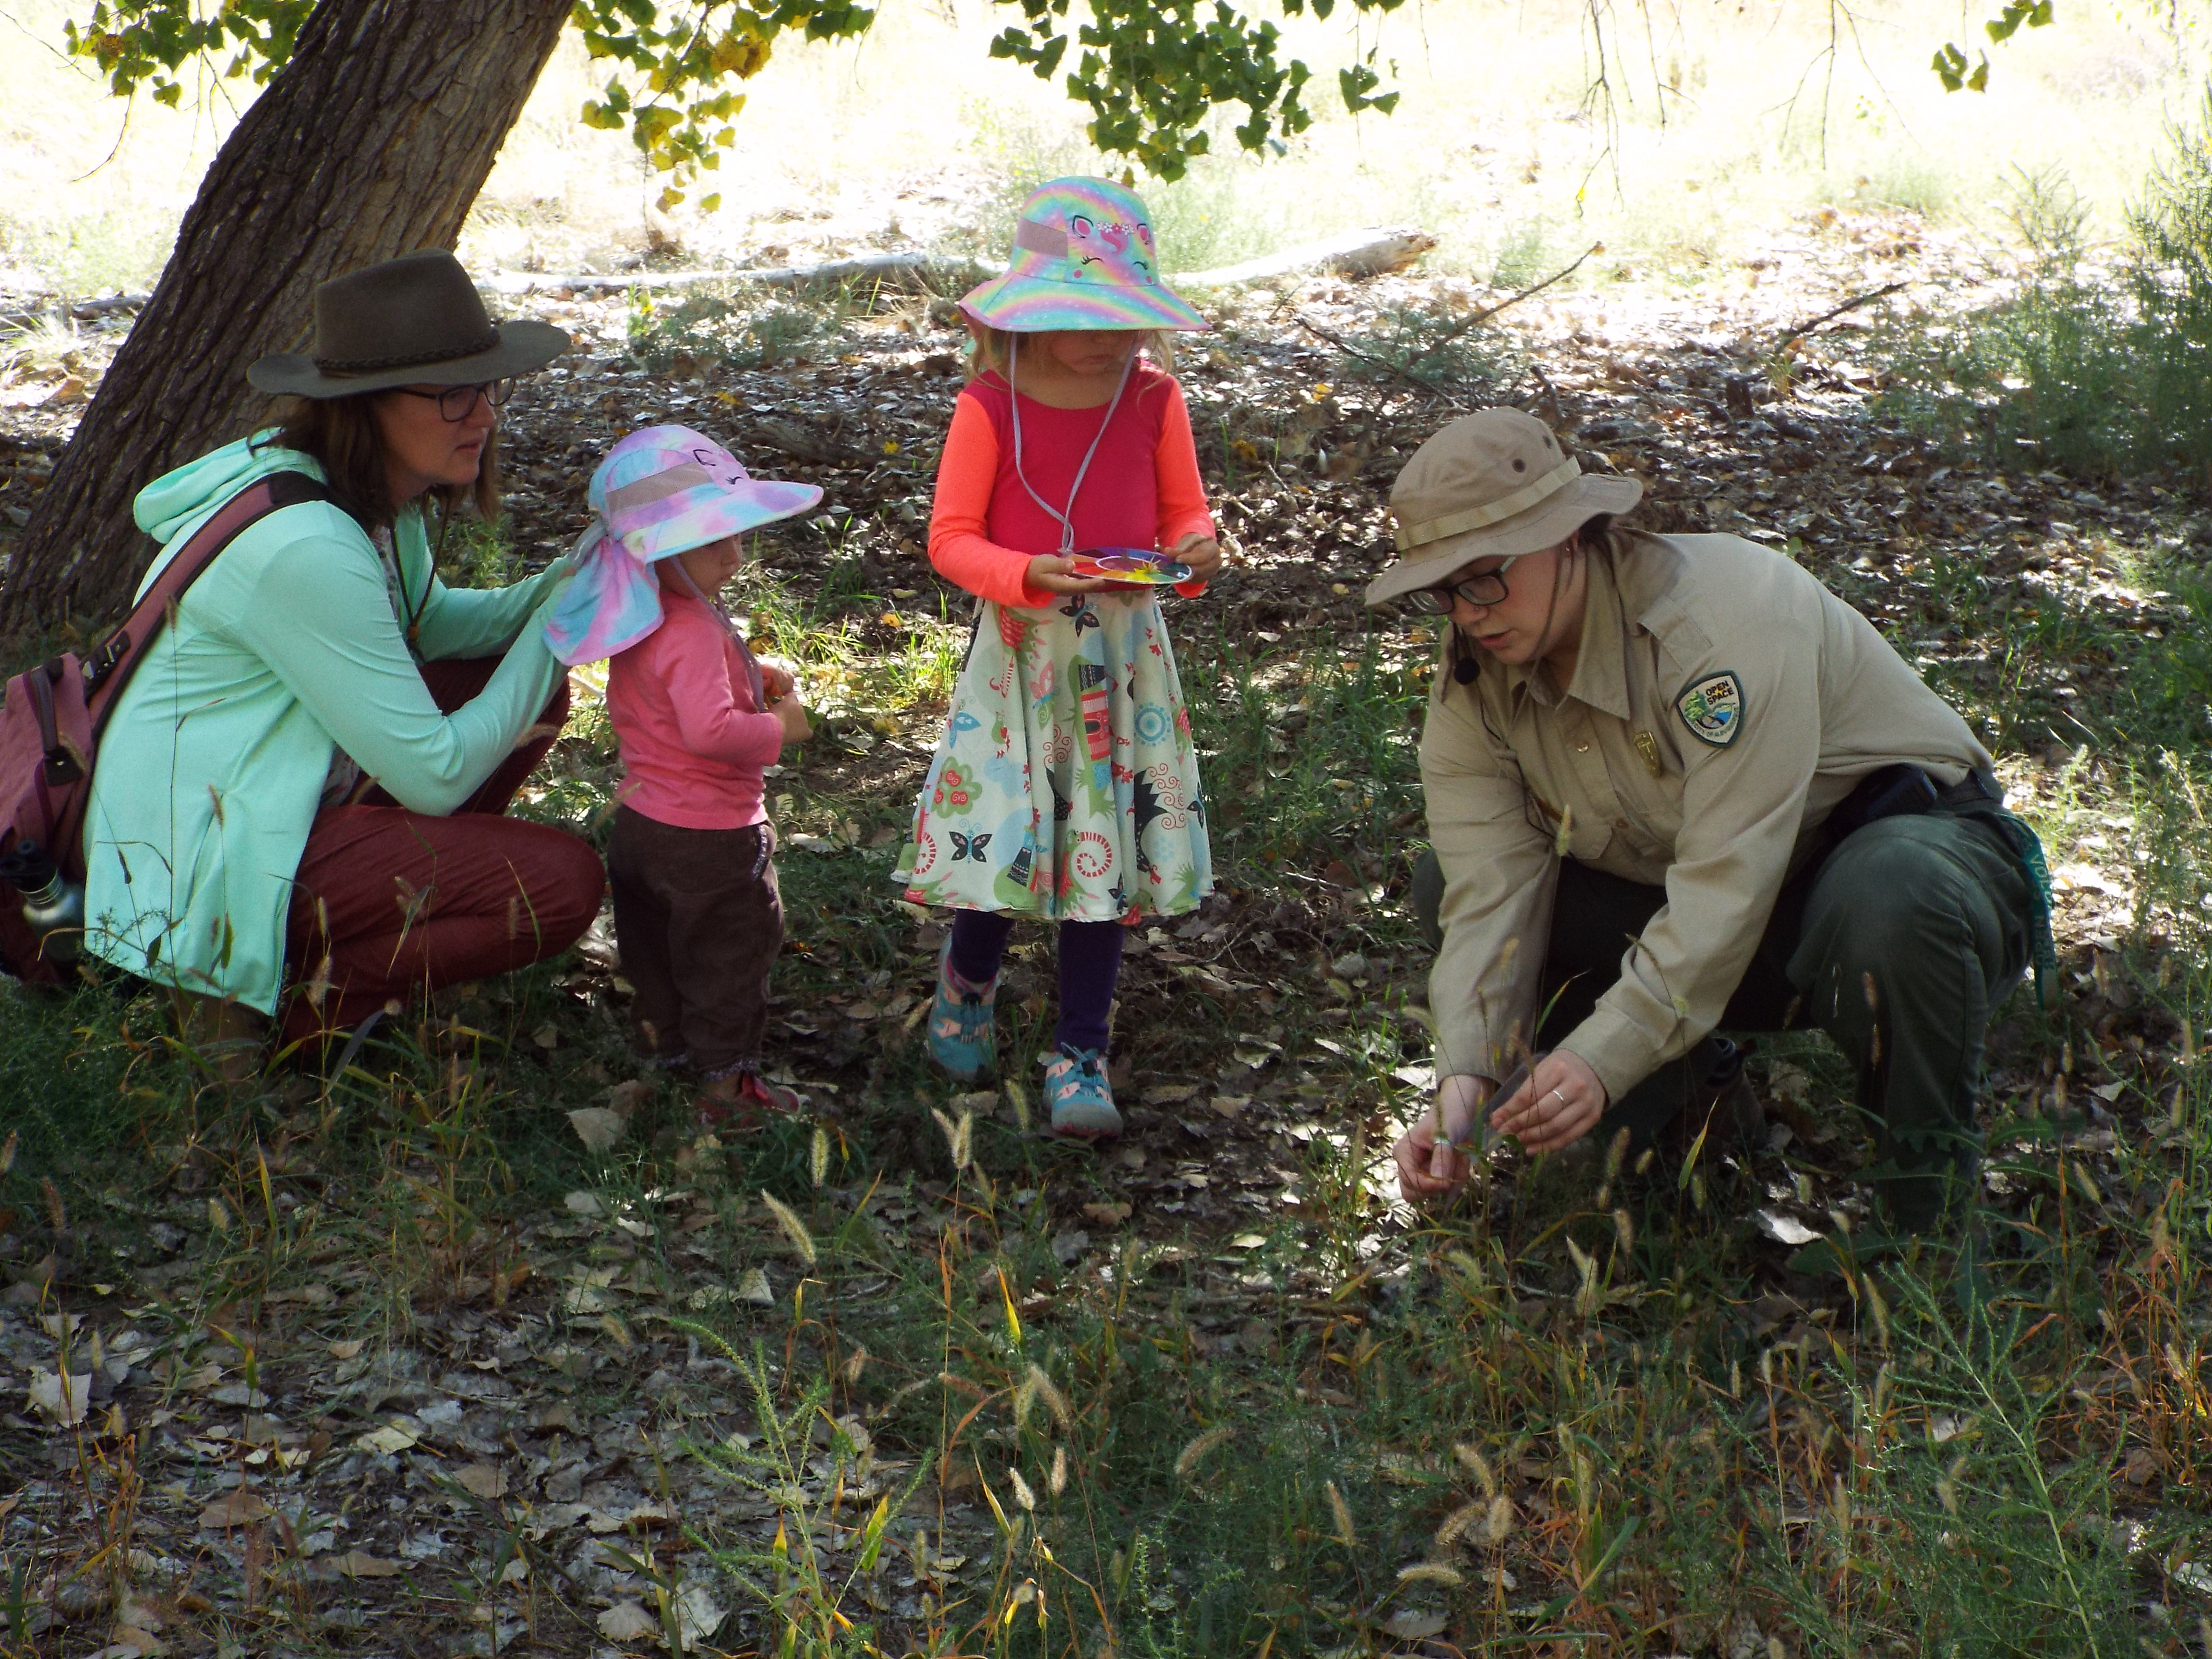 Image of a Bosque trail in broad daylight. Open Space Educator in outdoor uniform kneeling to the right and teaching two youth students in outdoor attire to the left as they observe the vegetation on the ground. Adult supervisor to the left of the students.